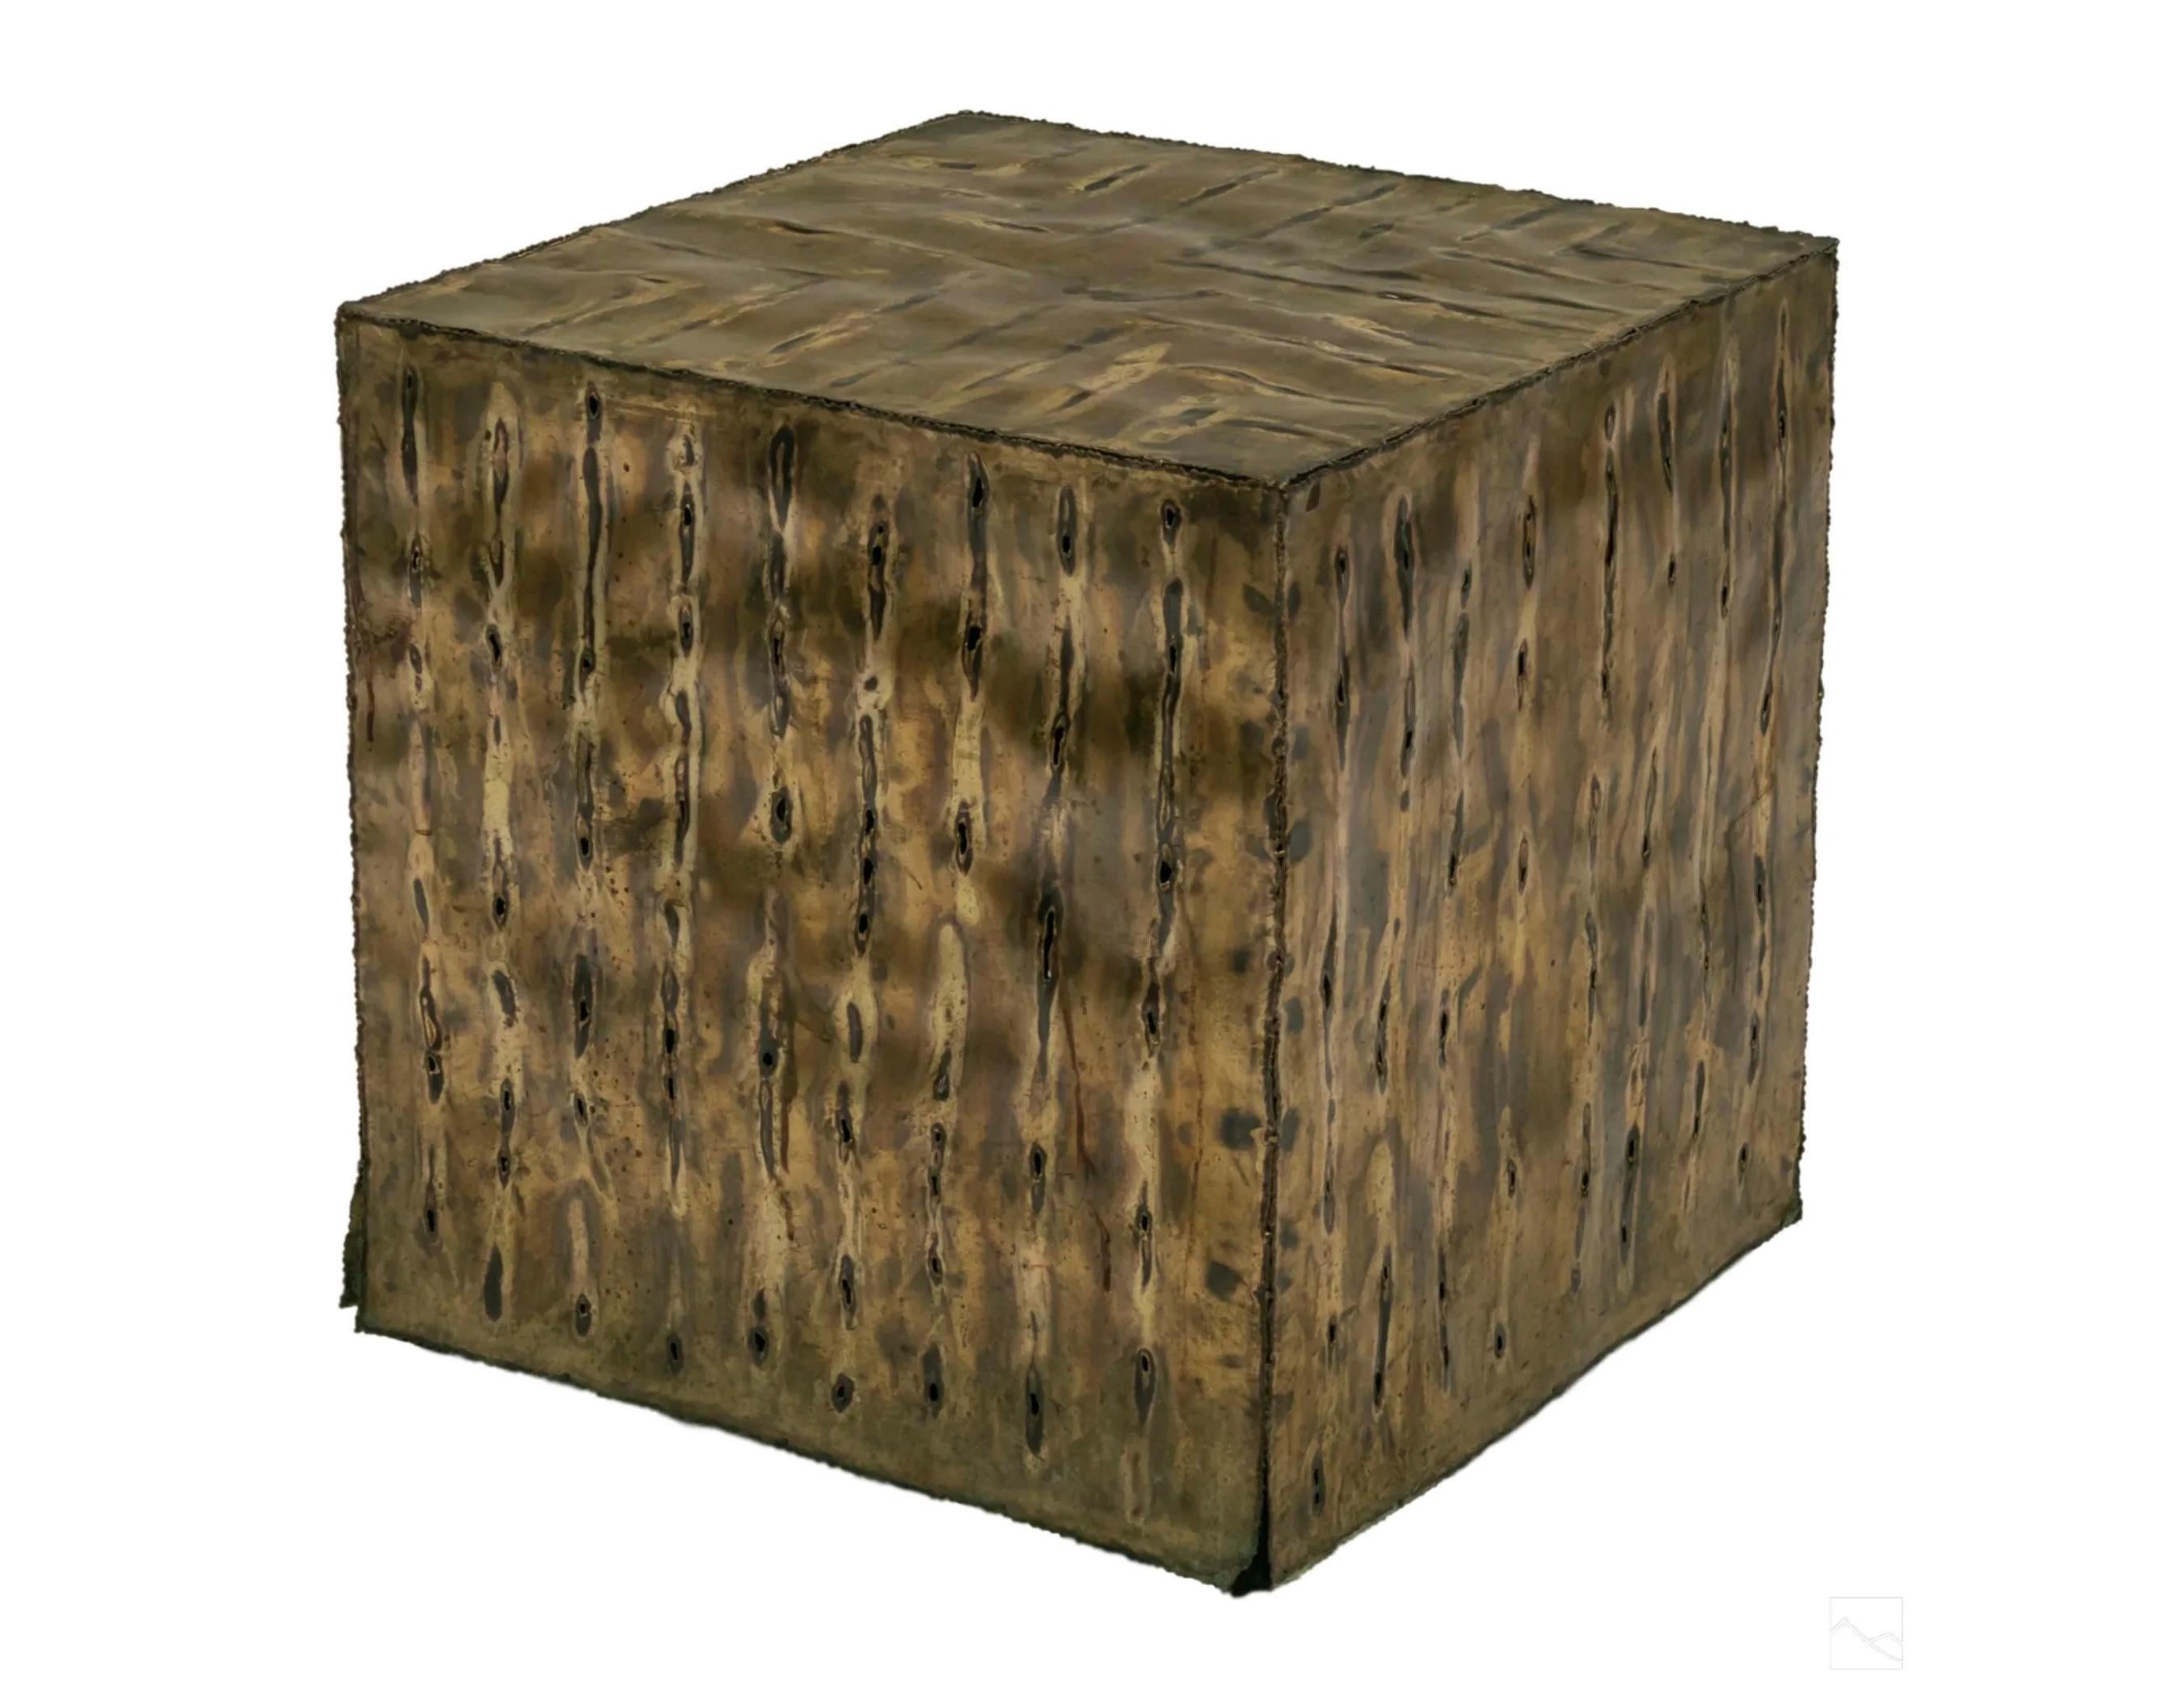 Brutalist cube table with welded mixed metals, welded torch holes
Nice original patinated surface.
 